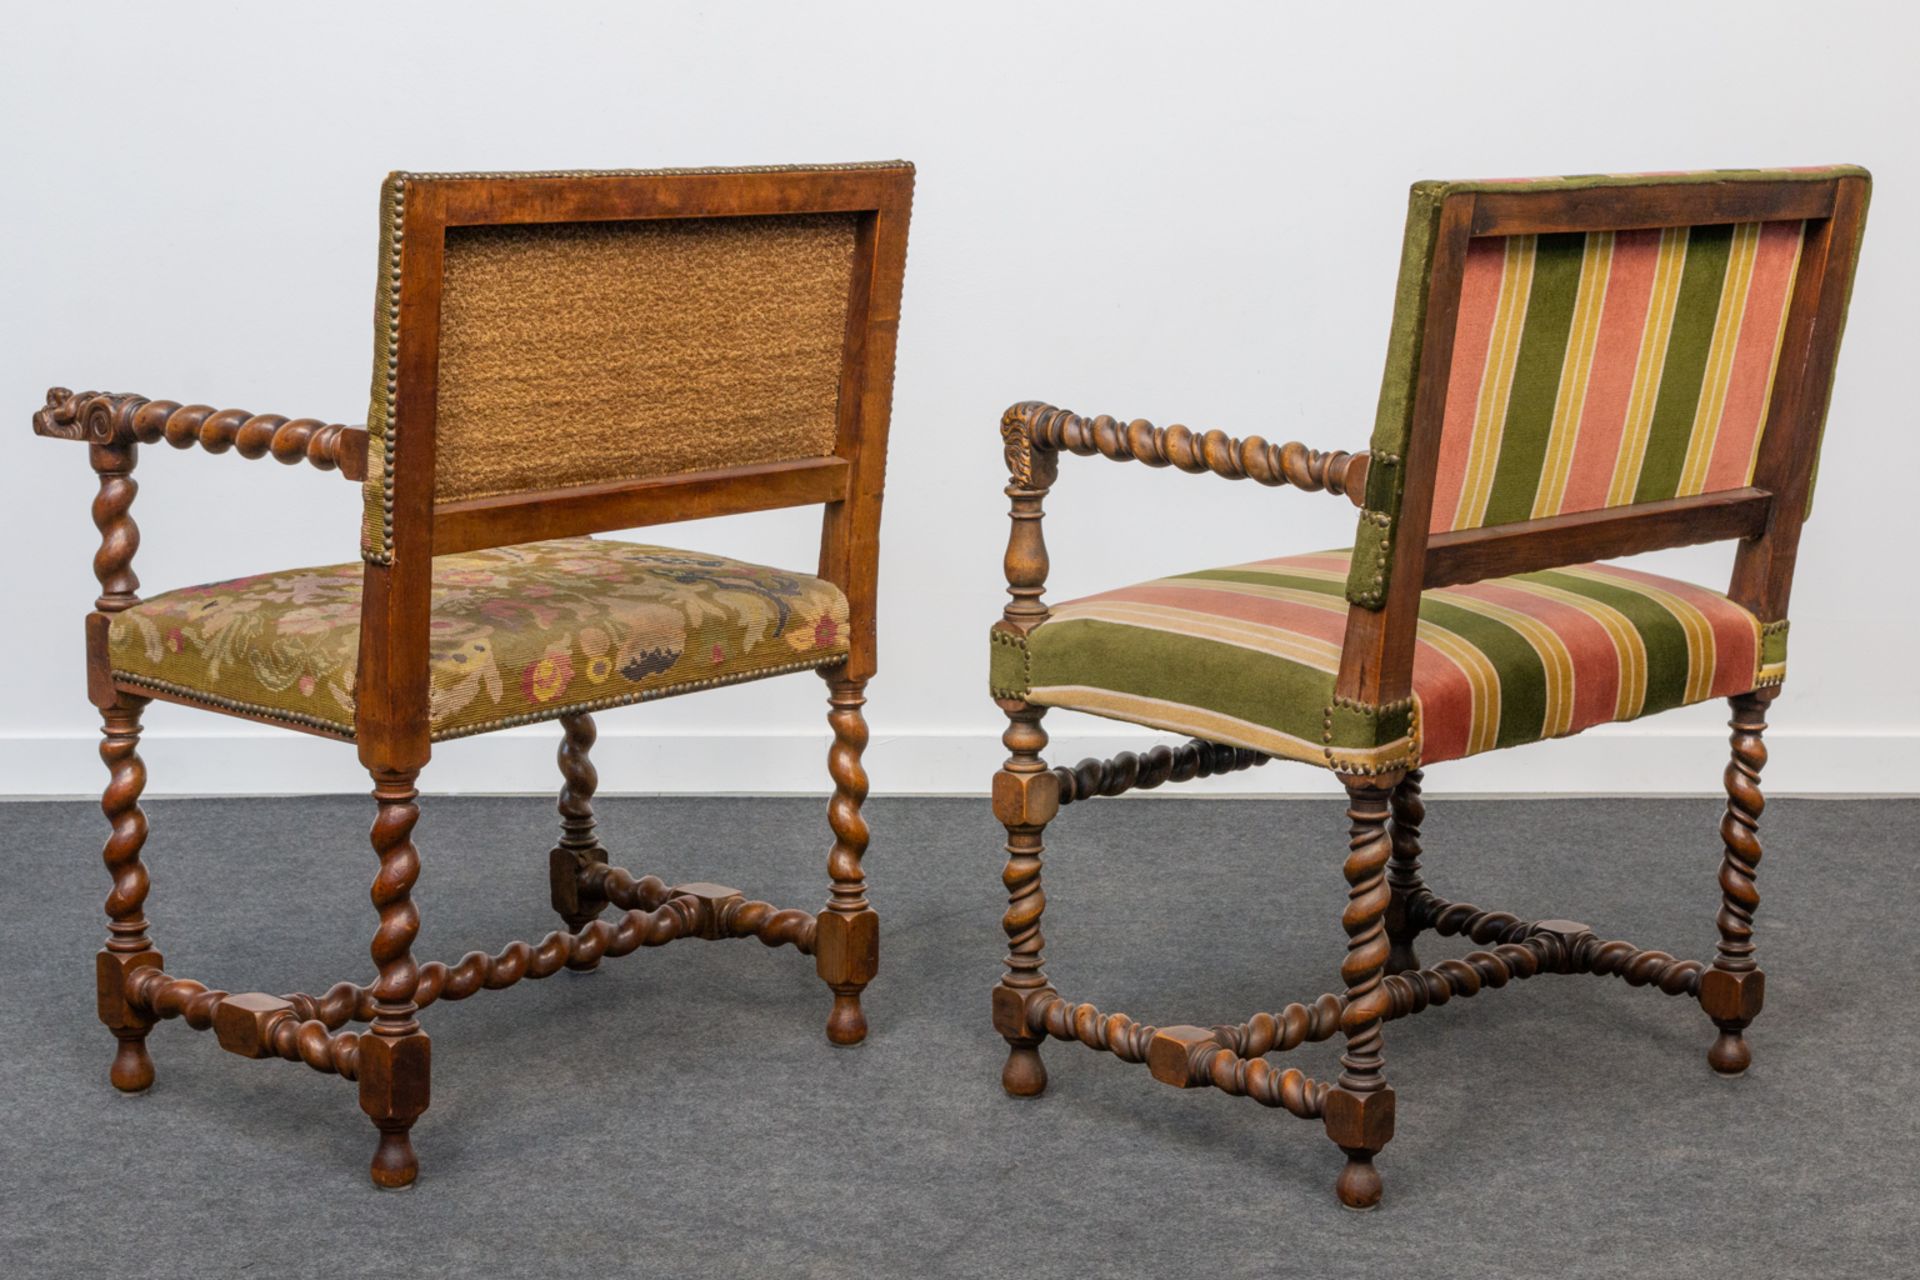 A collection of 2 castle chairs with sculptured handles. 19th century. (92 x 63 x 54 cm) - Bild 13 aus 18